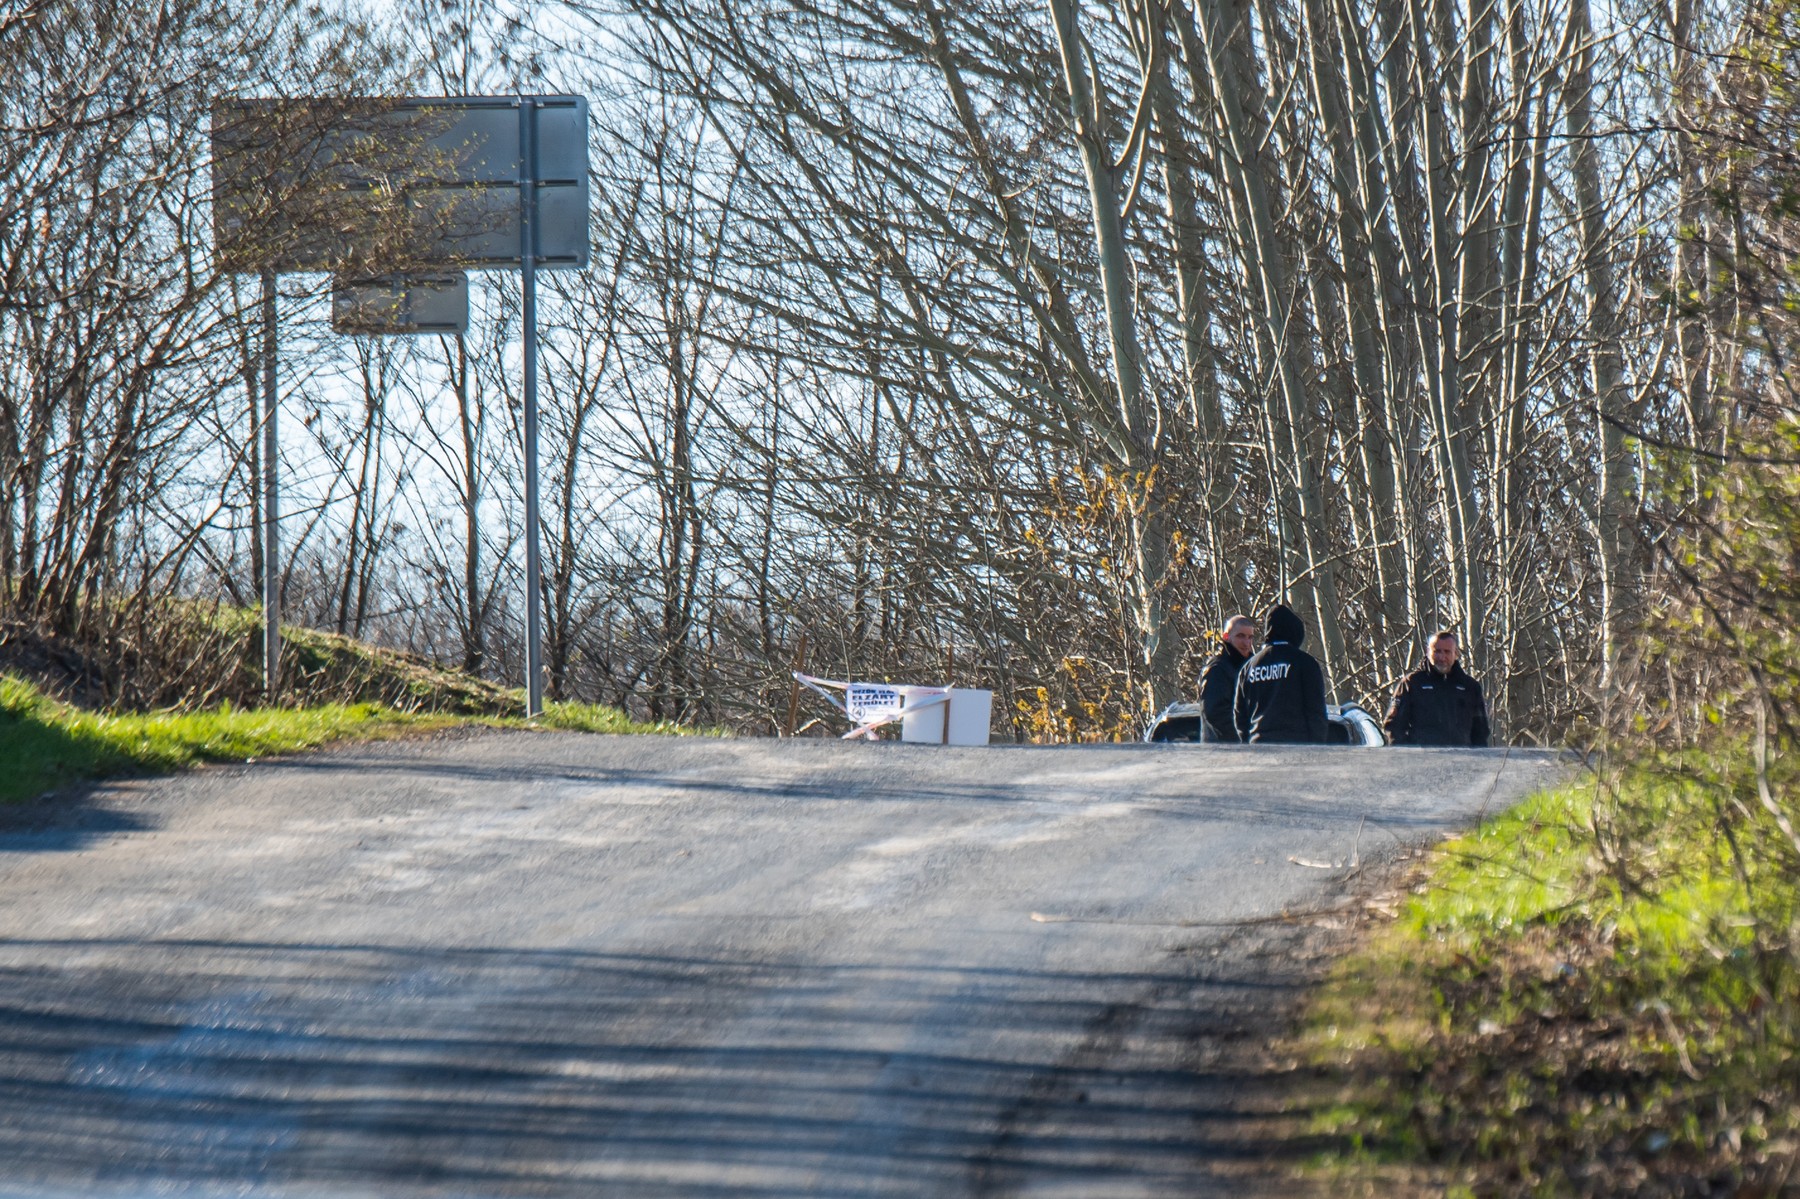 Hungarian police officers close the road near the crash site where a vehicle taking part in the Esztergom Nyerges Rally veered off from the road on March 24, 2024, near Bajot, 55kms away from Budapest. Four people were killed and several others injured when a vehicle competing in a Hungarian rally on March 24 afternoon skidded off the road and crashed into spectators, authorities said. According to a police statement, a vehicle taking part in the Esztergom Nyerges Rally in northern Hungary, for reasons yet unclear, veered off the road and crashed into spectators.,Image: 859235184, License: Rights-managed, Restrictions: , Model Release: no, Credit line: FERENC ISZA / AFP / Profimedia